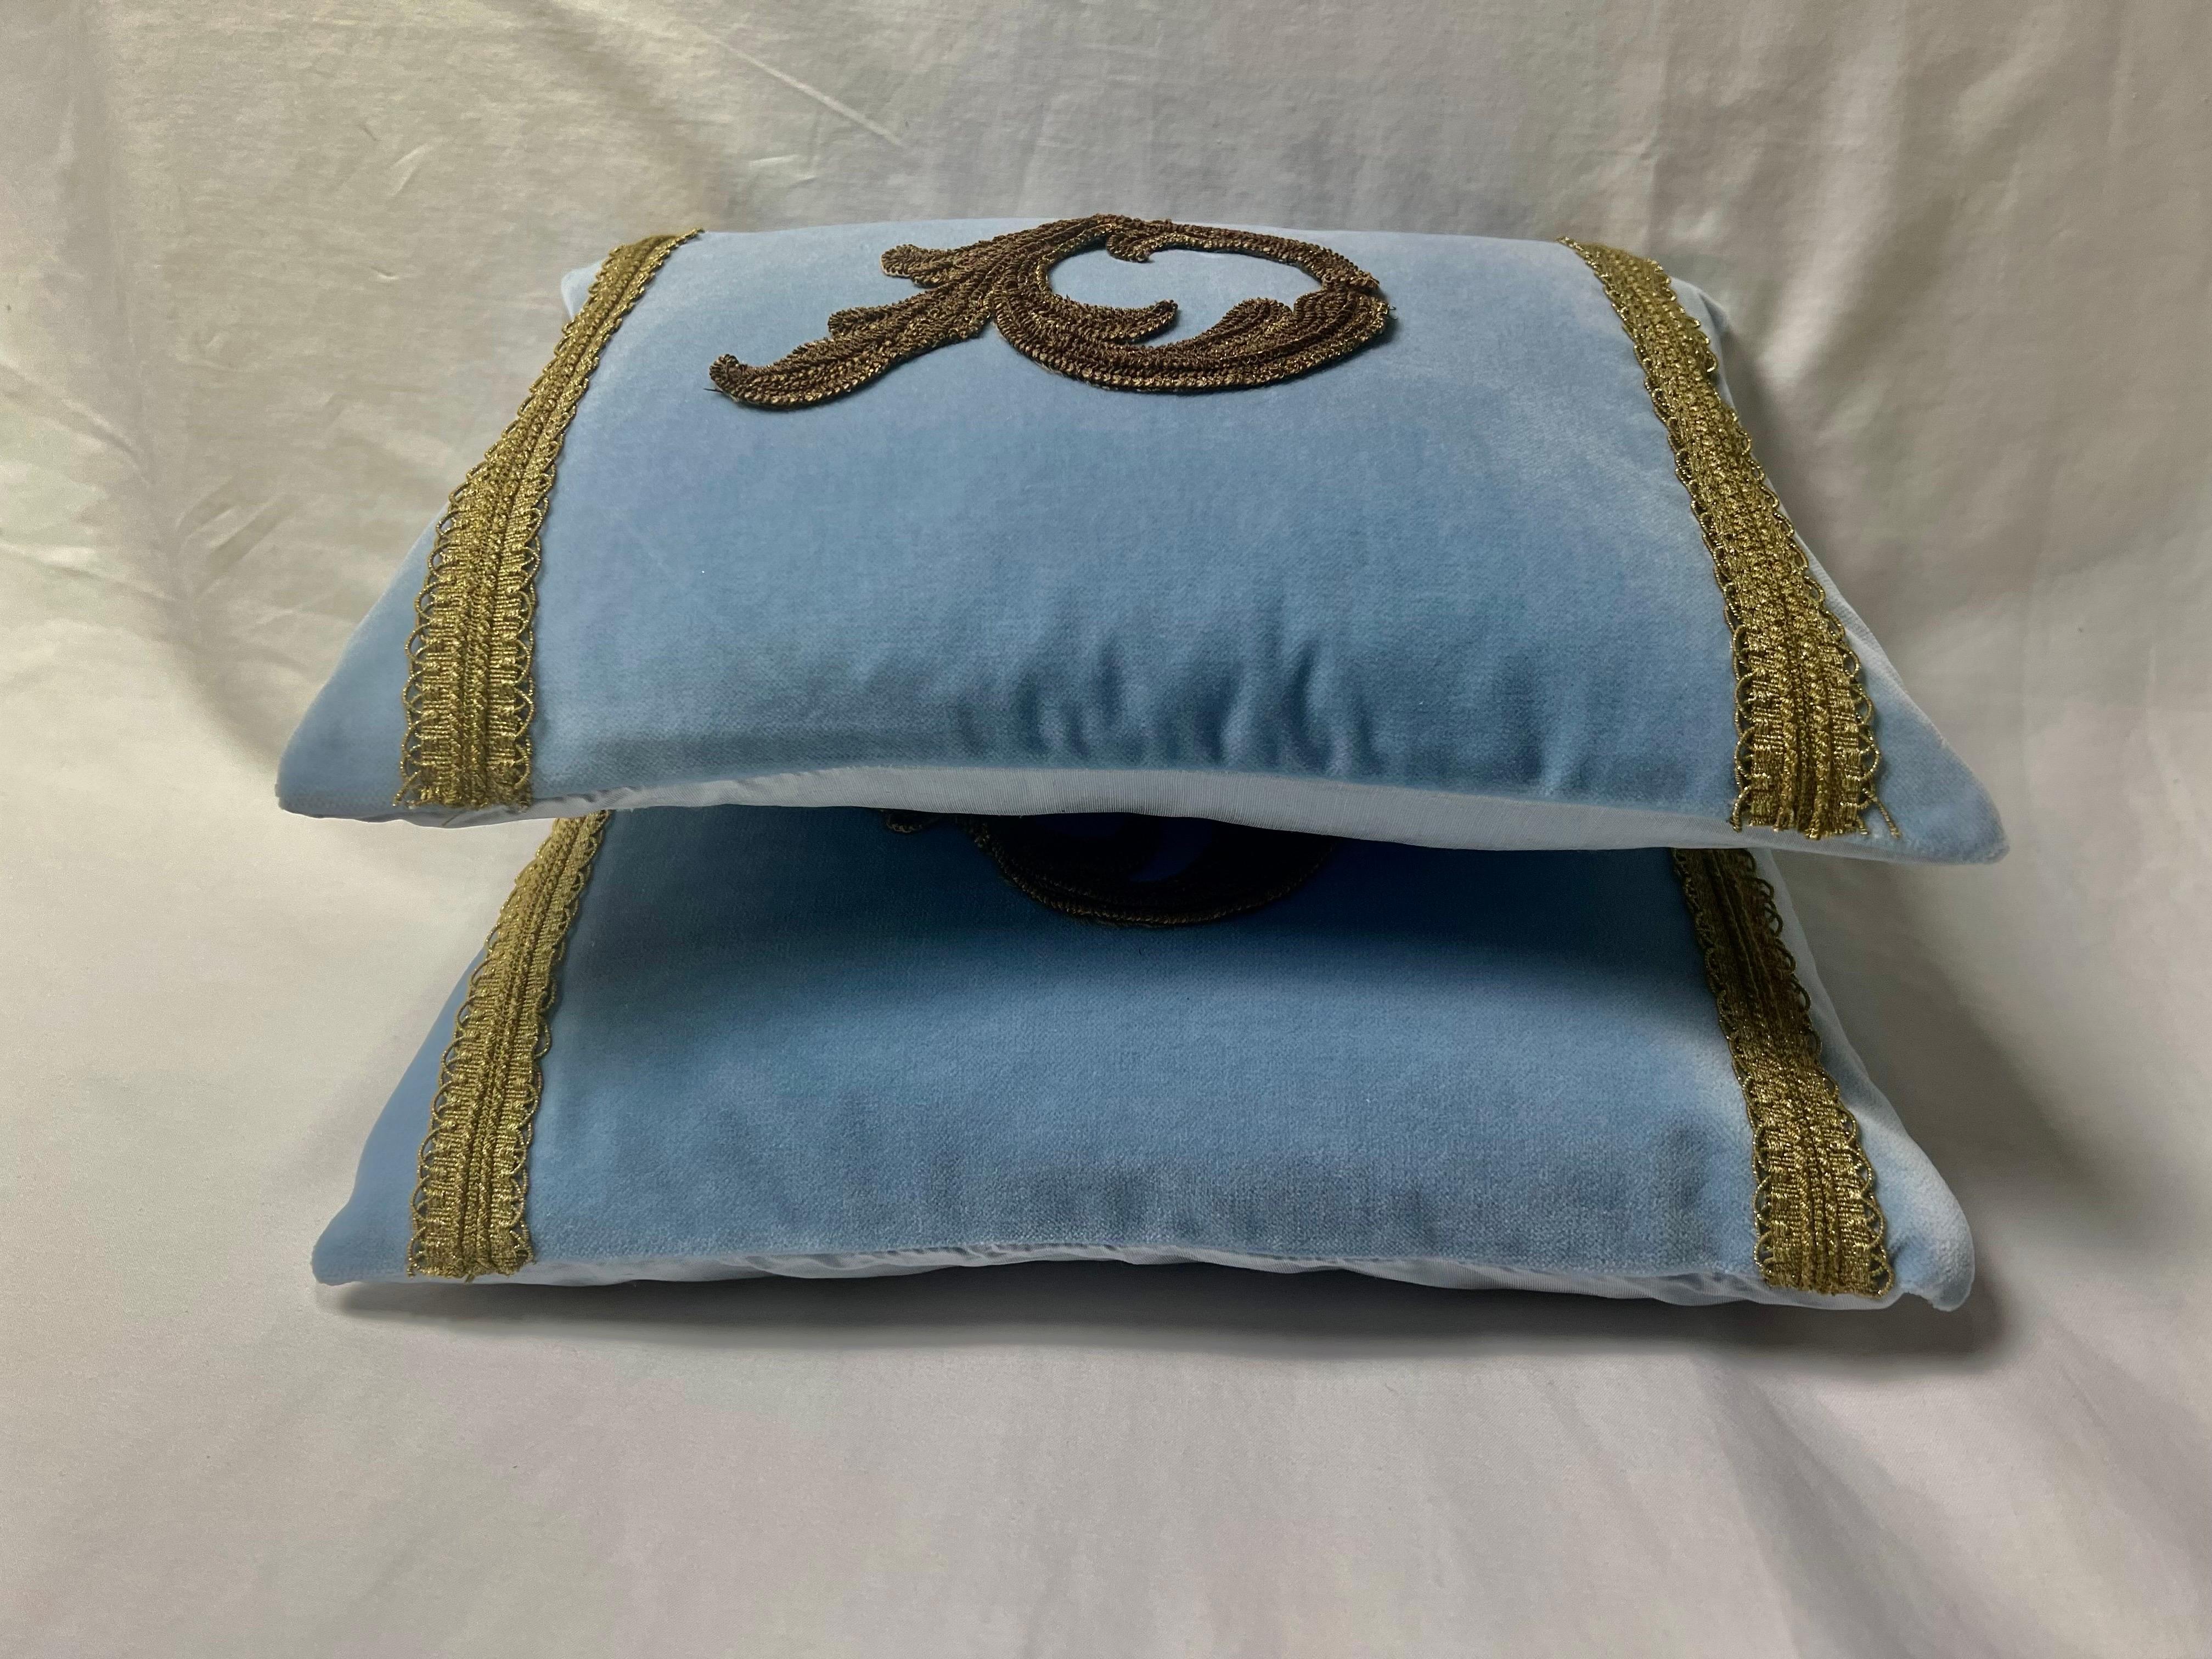 Other Pair of Custom Appliqué Blue & Gold Pillows by MLA